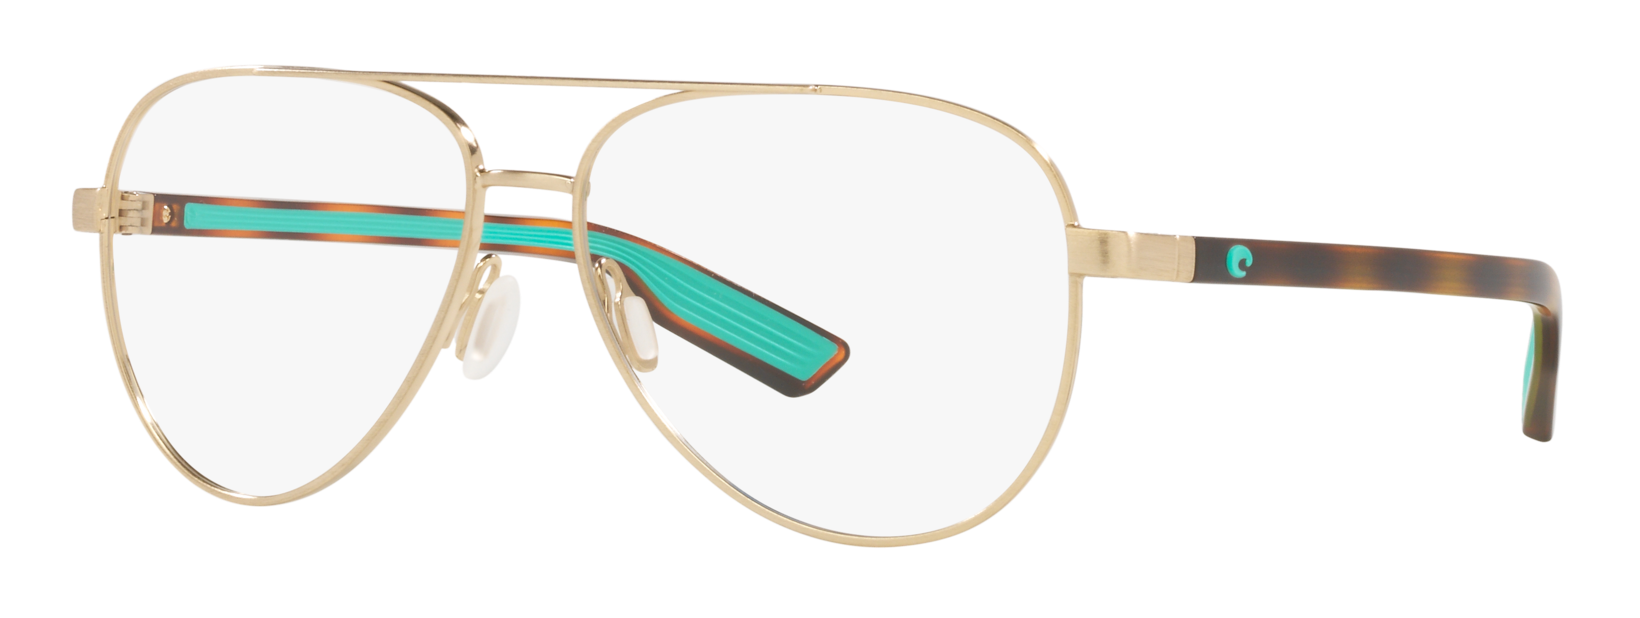 Costa Peli Rx aviator eyeglasses in gold with tortoise and turquoise temples.